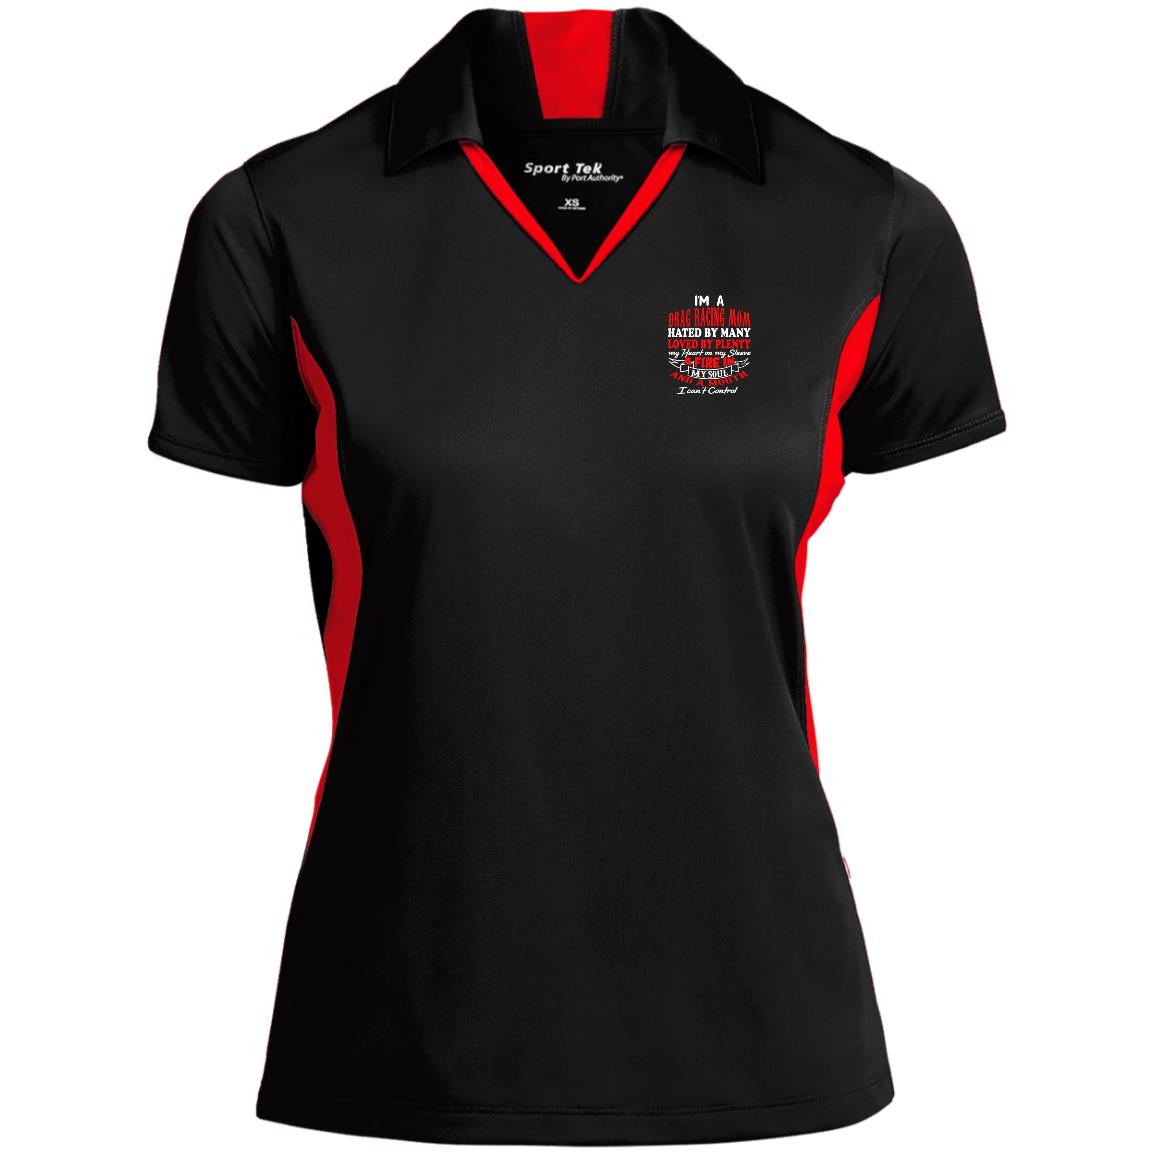 I'm A Drag Racing Mom Hated By Many Loved By Plenty Ladies' Colorblock Performance Polo